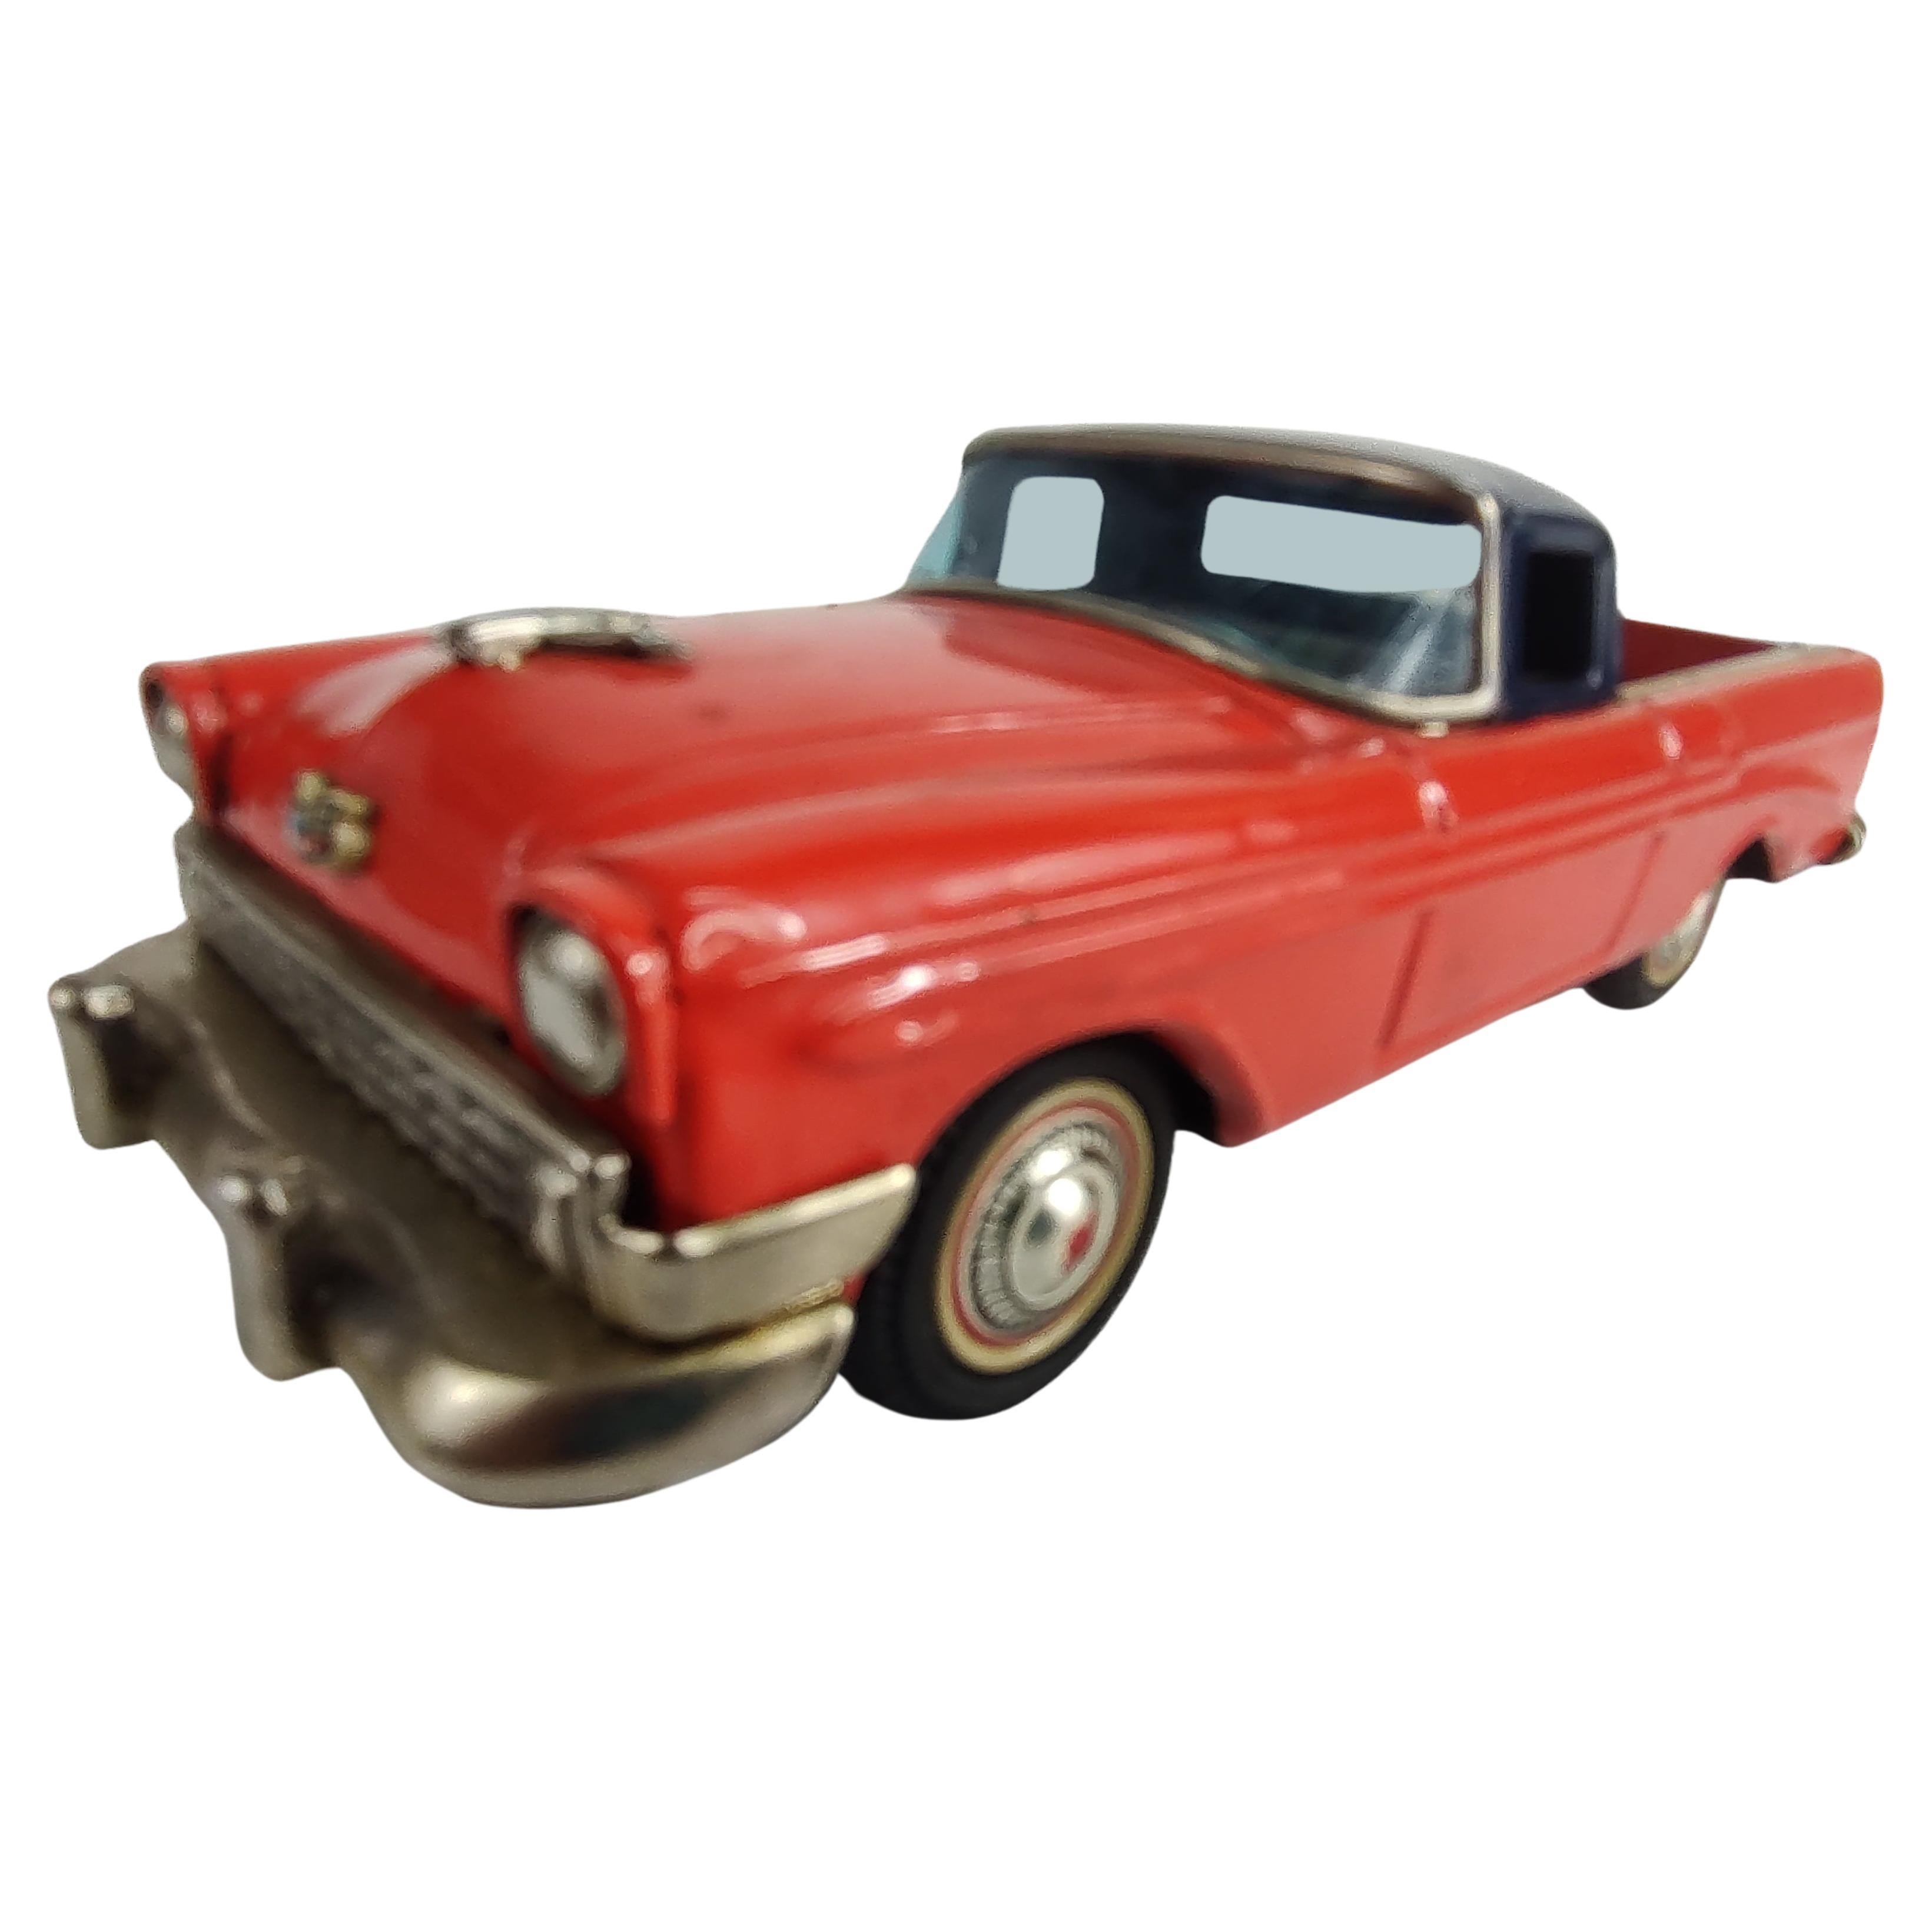 Mid Century Japanese Tin Litho Friction Toy Car Chevrolet El Camino C1956 For Sale 3